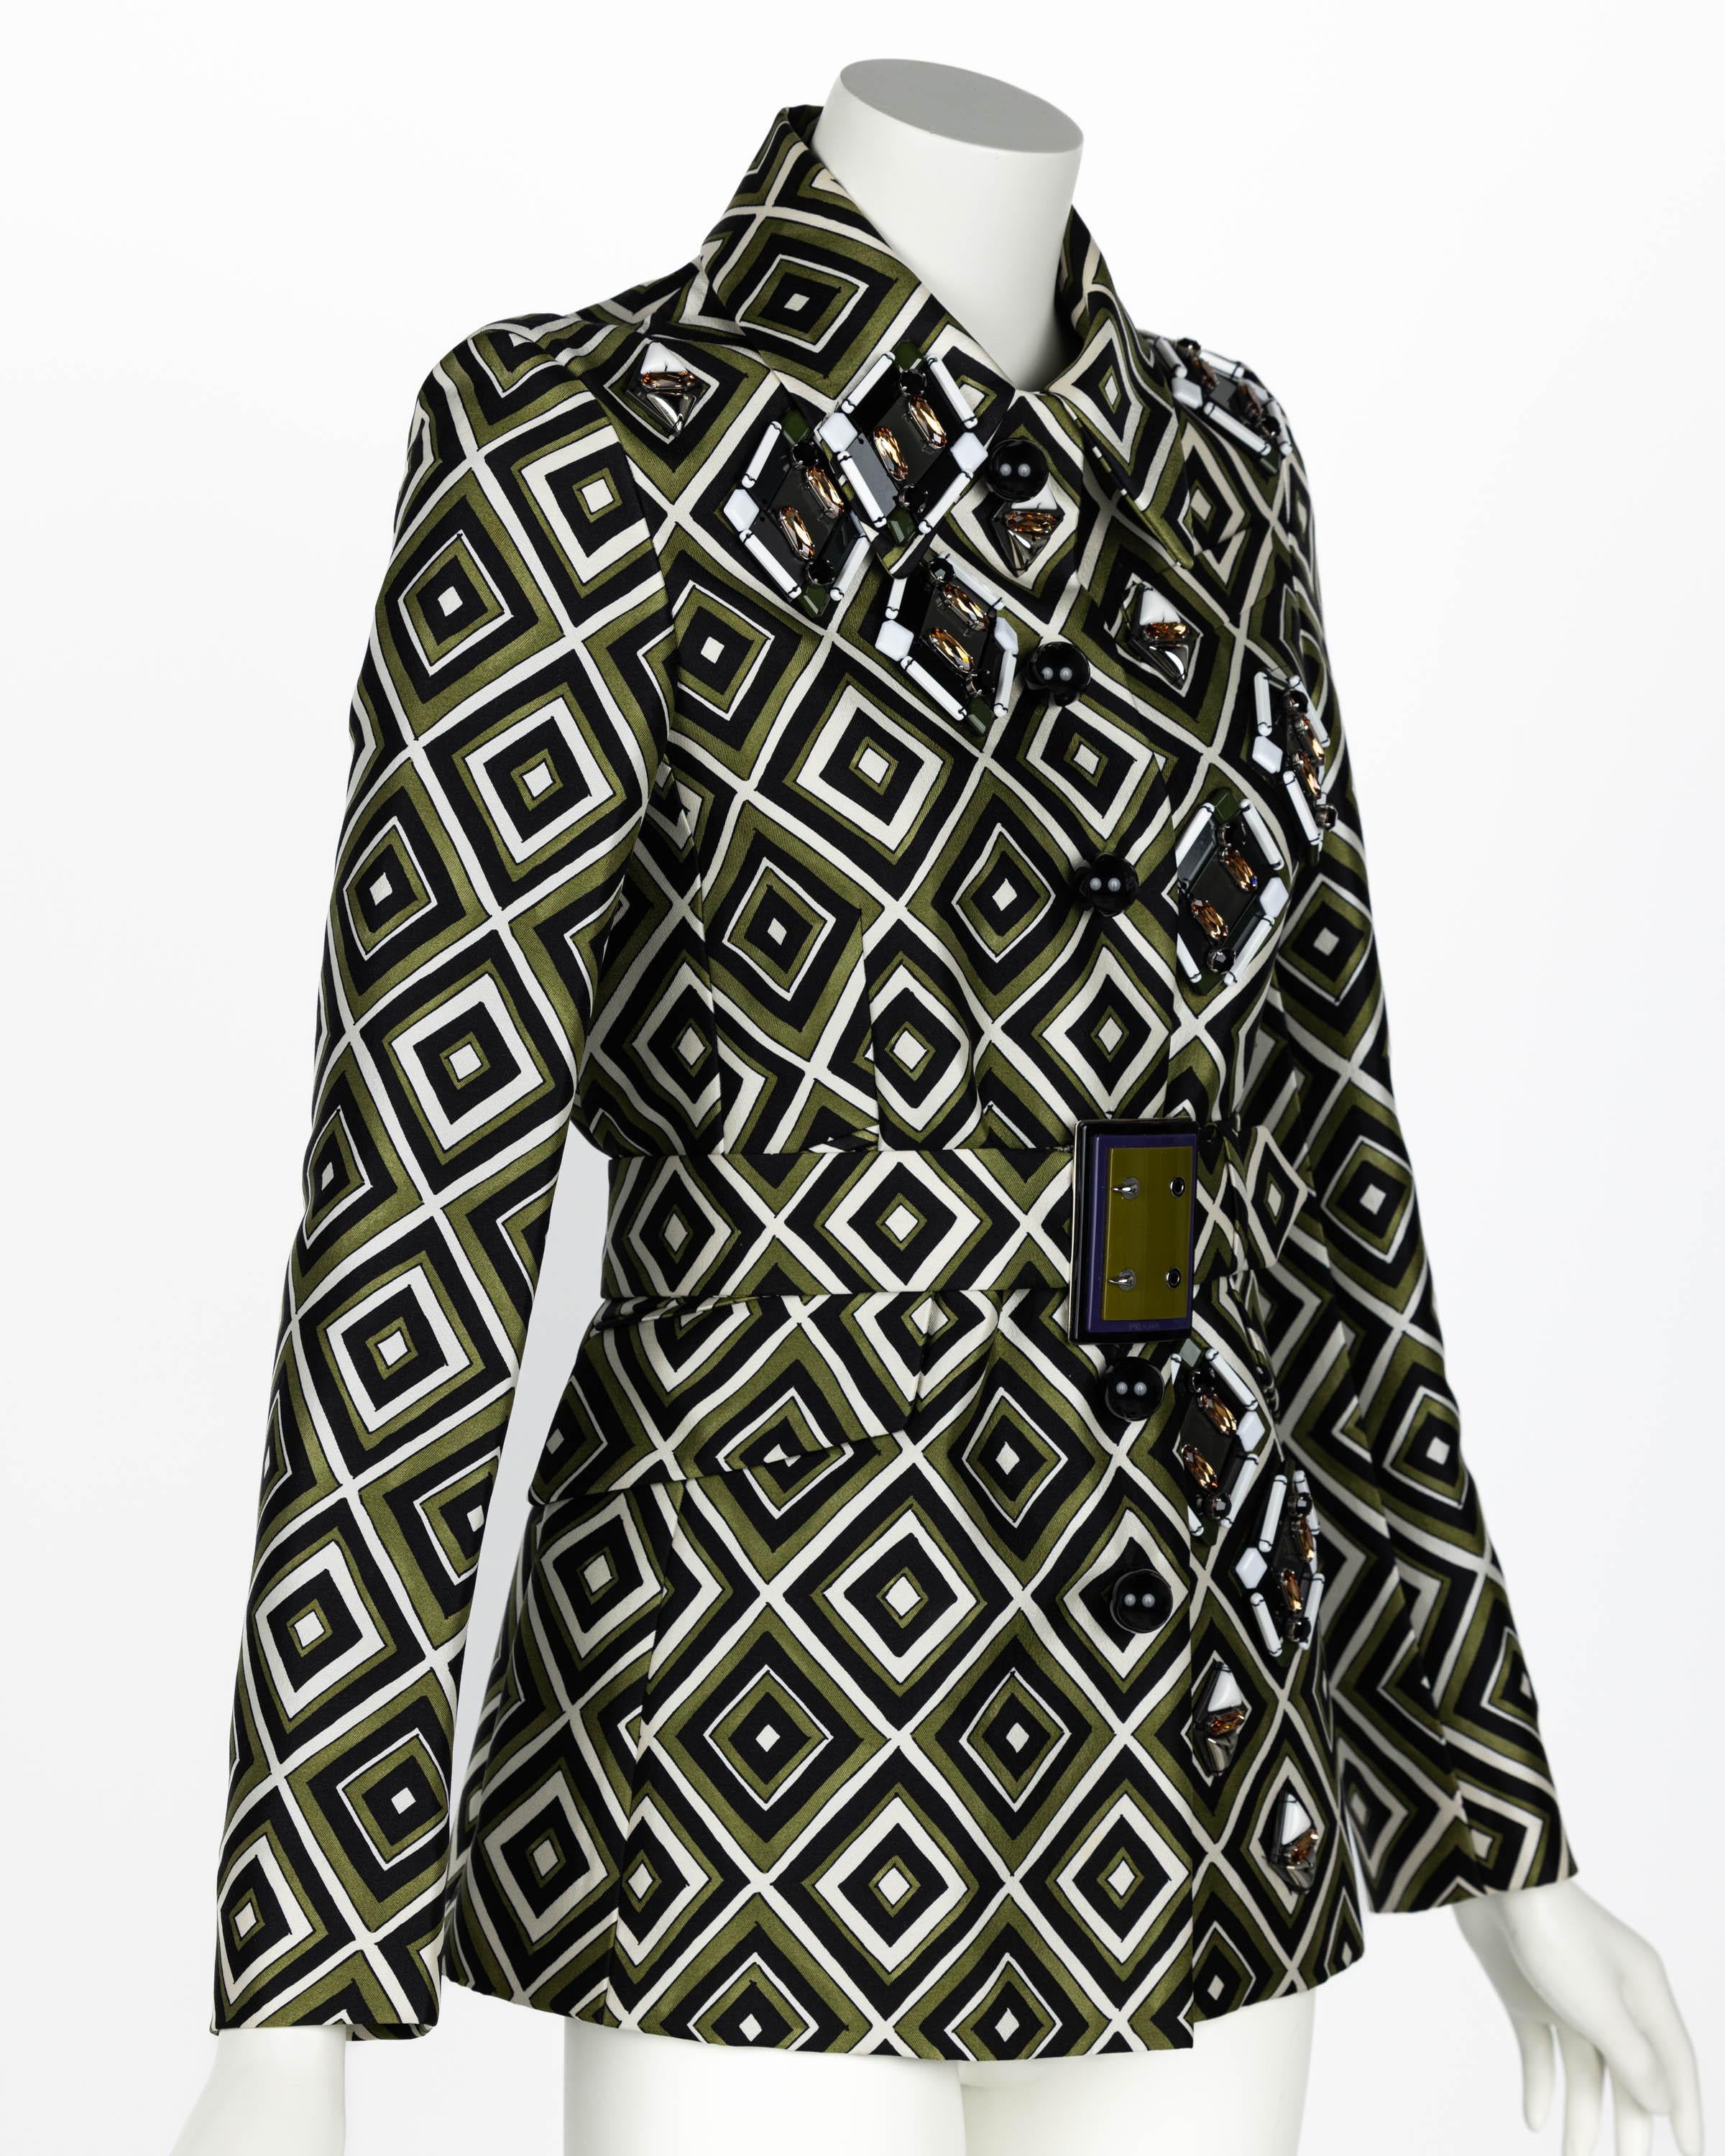 Prada F/W 2012 Geometric Print Crystal & Plexi Embellished Belted Jacket In Excellent Condition For Sale In Boca Raton, FL